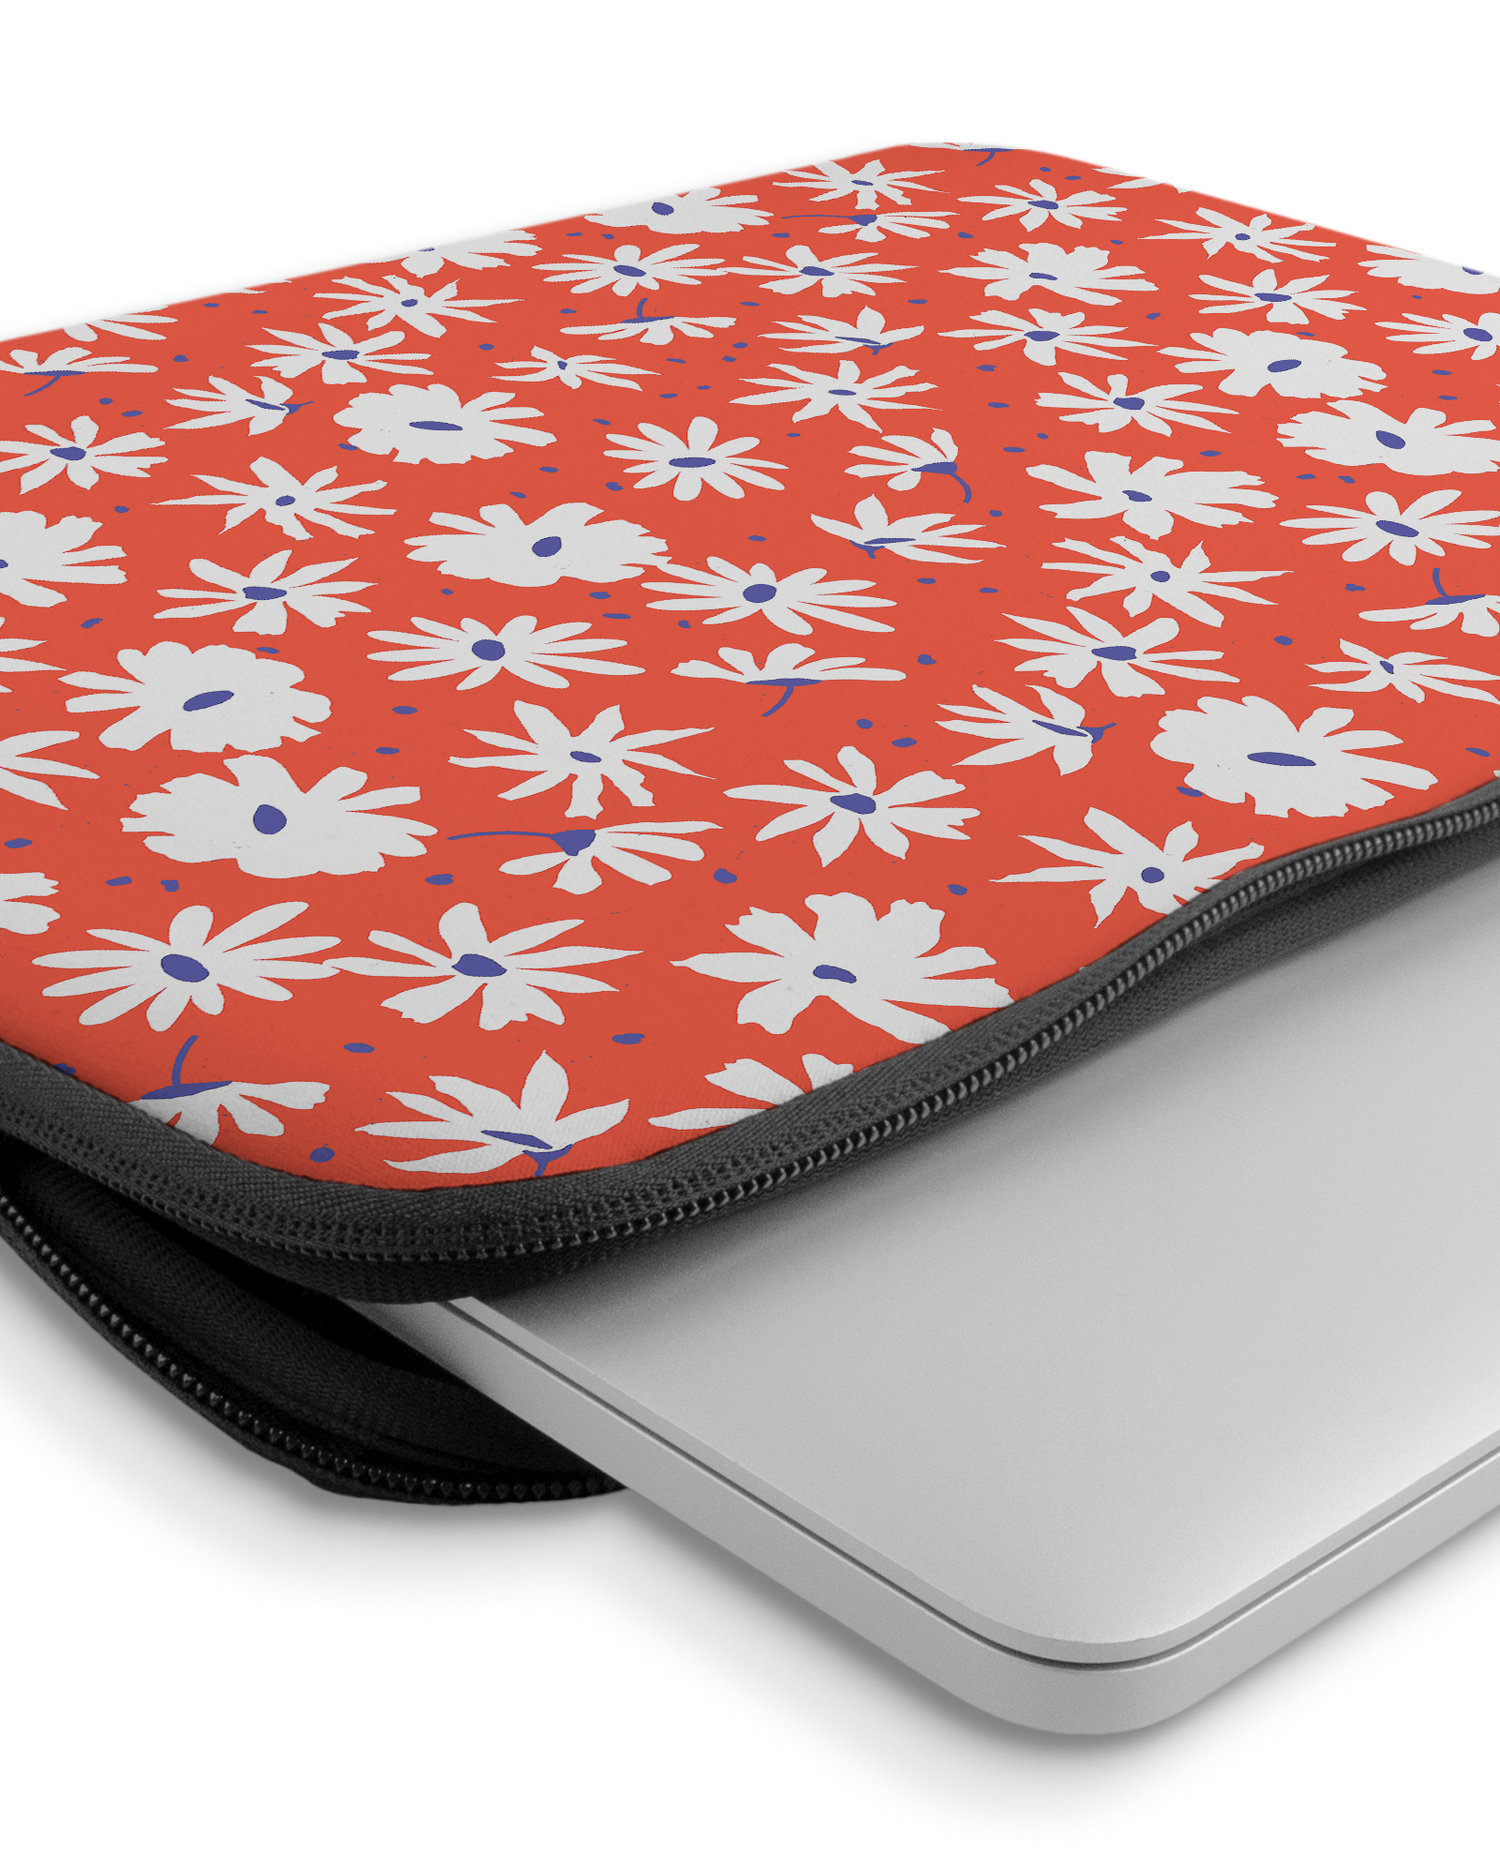 Retro Daisy Laptop Case 14-15 inch with device inside